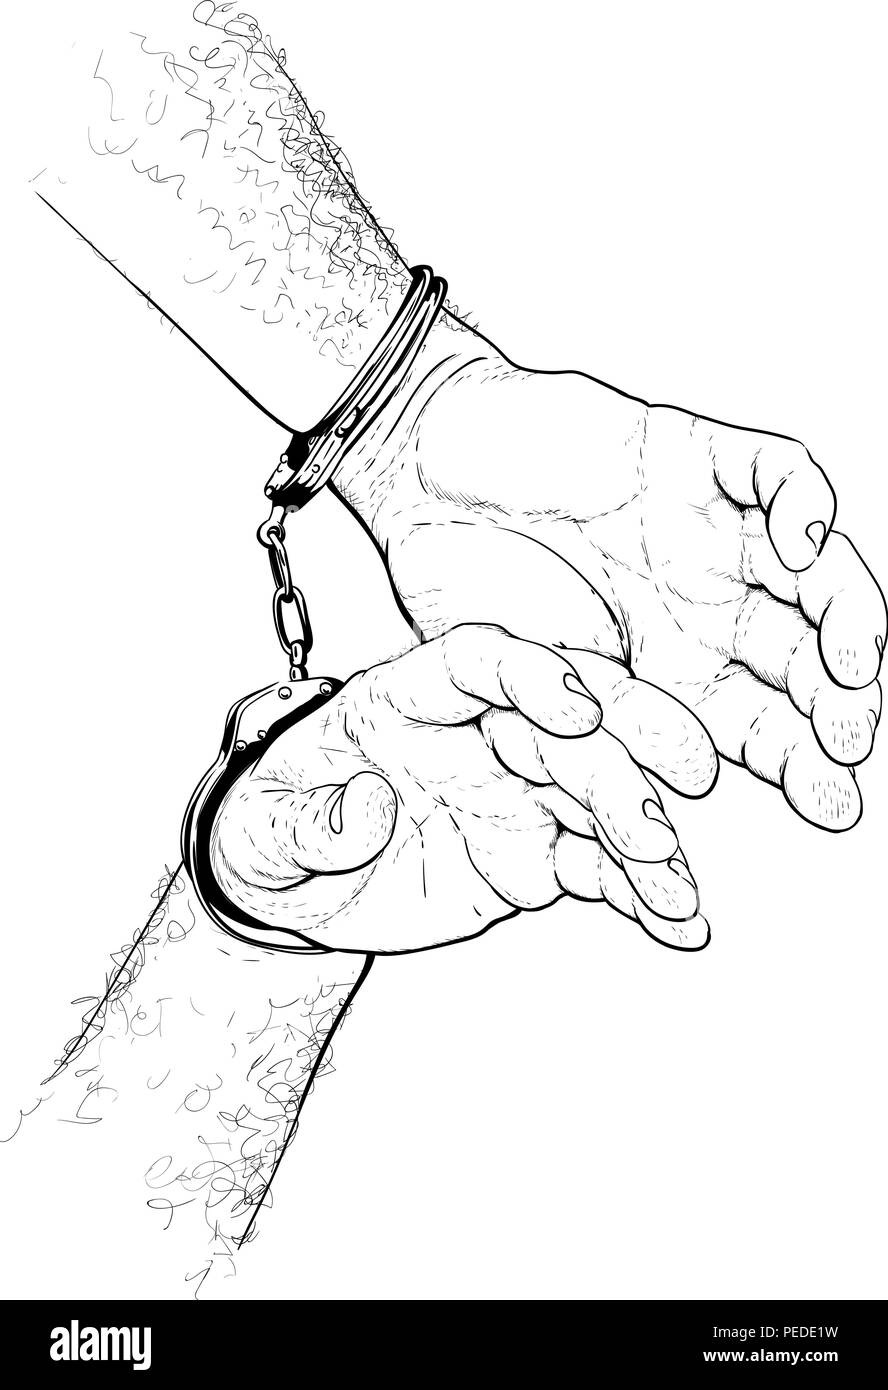 Handcuffs on hands Stock Vector